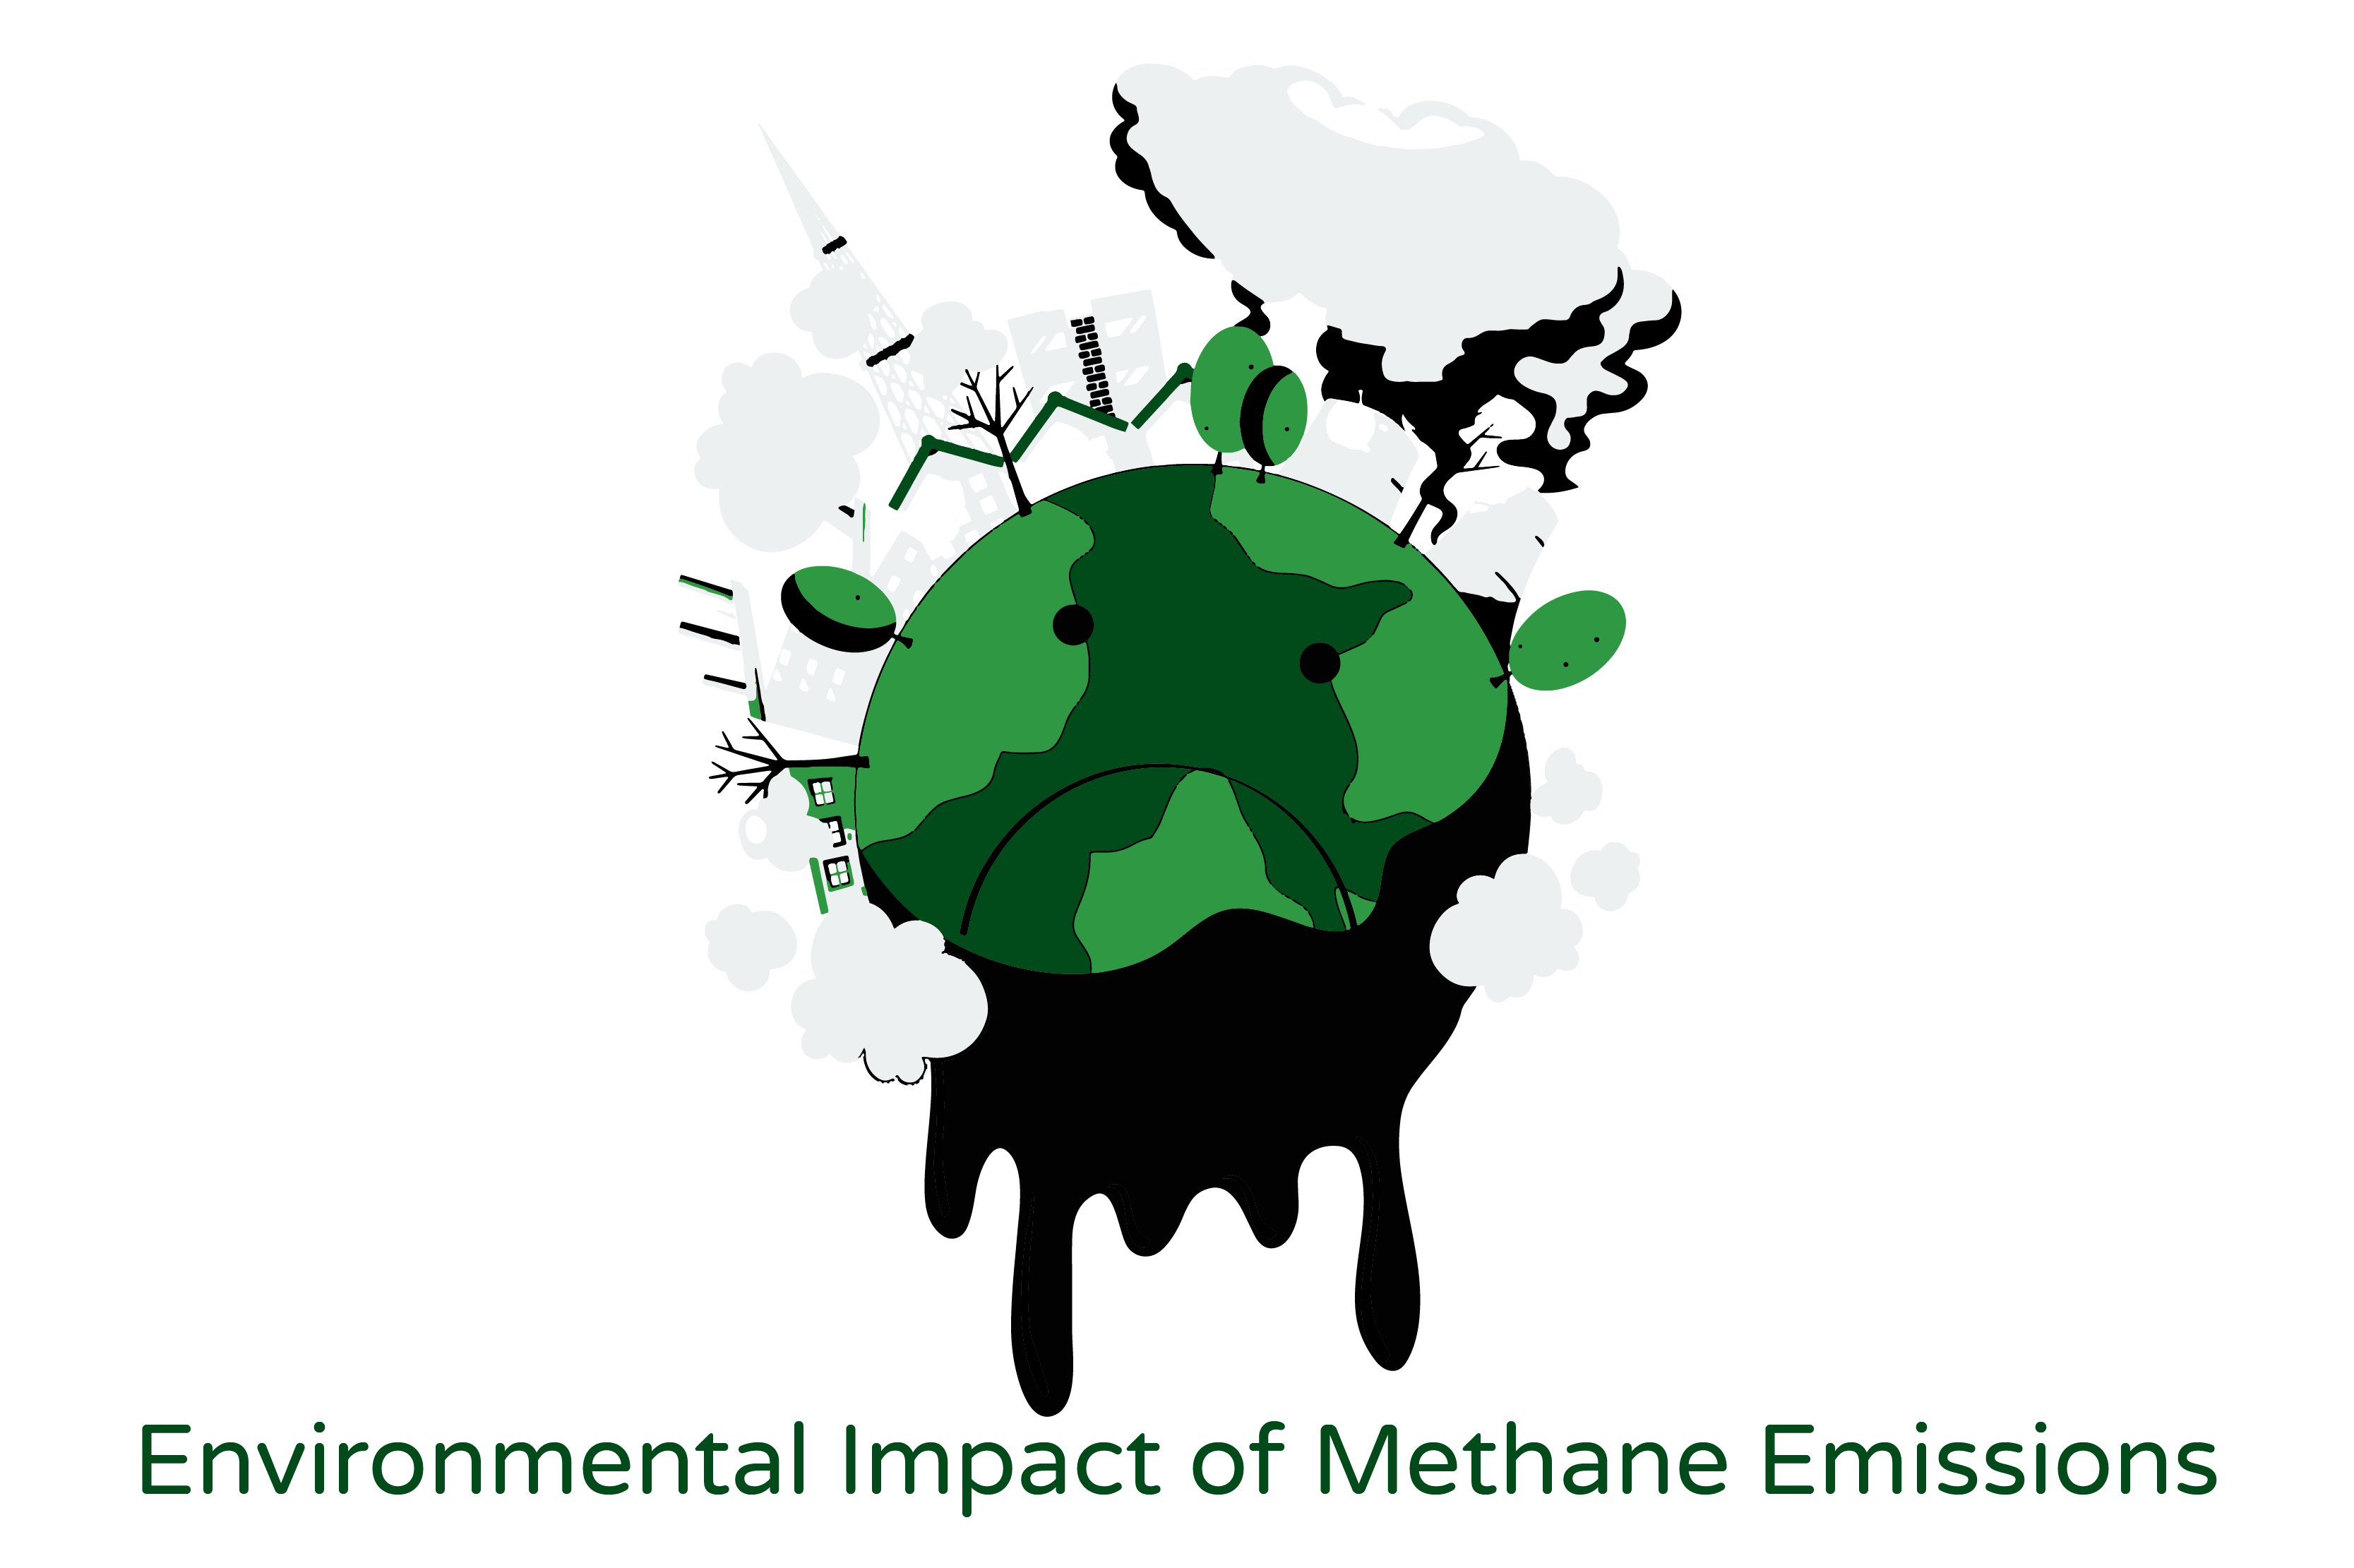 An image depicting the environmental impact of methane emissions. The visual shows a globe with a melting ice cap, symbolizing the negative impact of methane emissions on the environment. The image highlights the link between greenhouse gas emissions, particularly methane, and global warming. The melting ice cap also suggests that the impact of methane emissions is not limited to a particular region or population, but rather has global implications. The image serves to emphasize the urgent need for action to address methane emissions and mitigate their harmful effects on the planet.